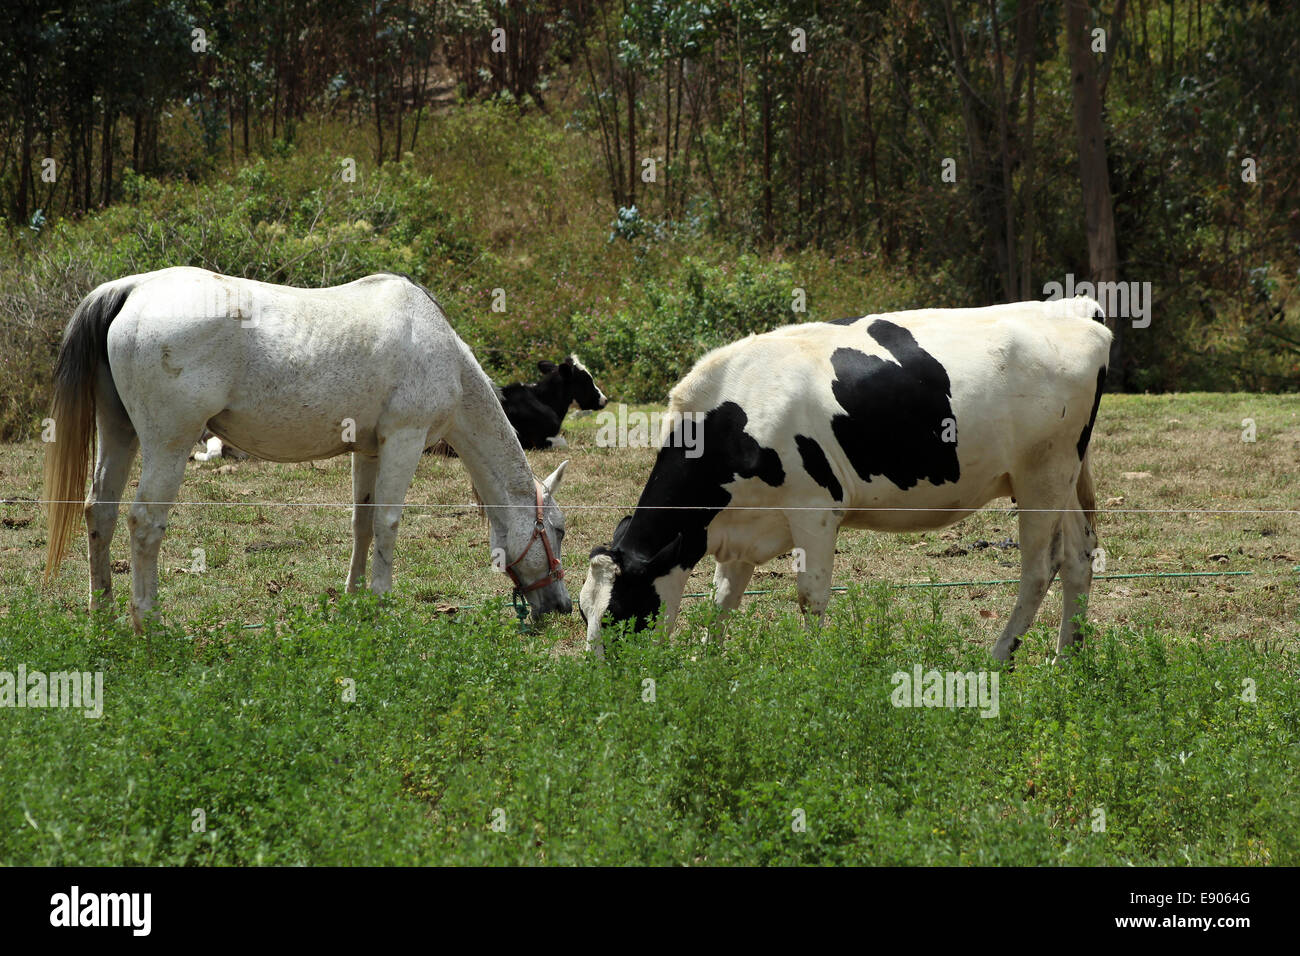 A Holstein cow and a white horse in a farmers pasture in Cotacachi, Ecuador Stock Photo